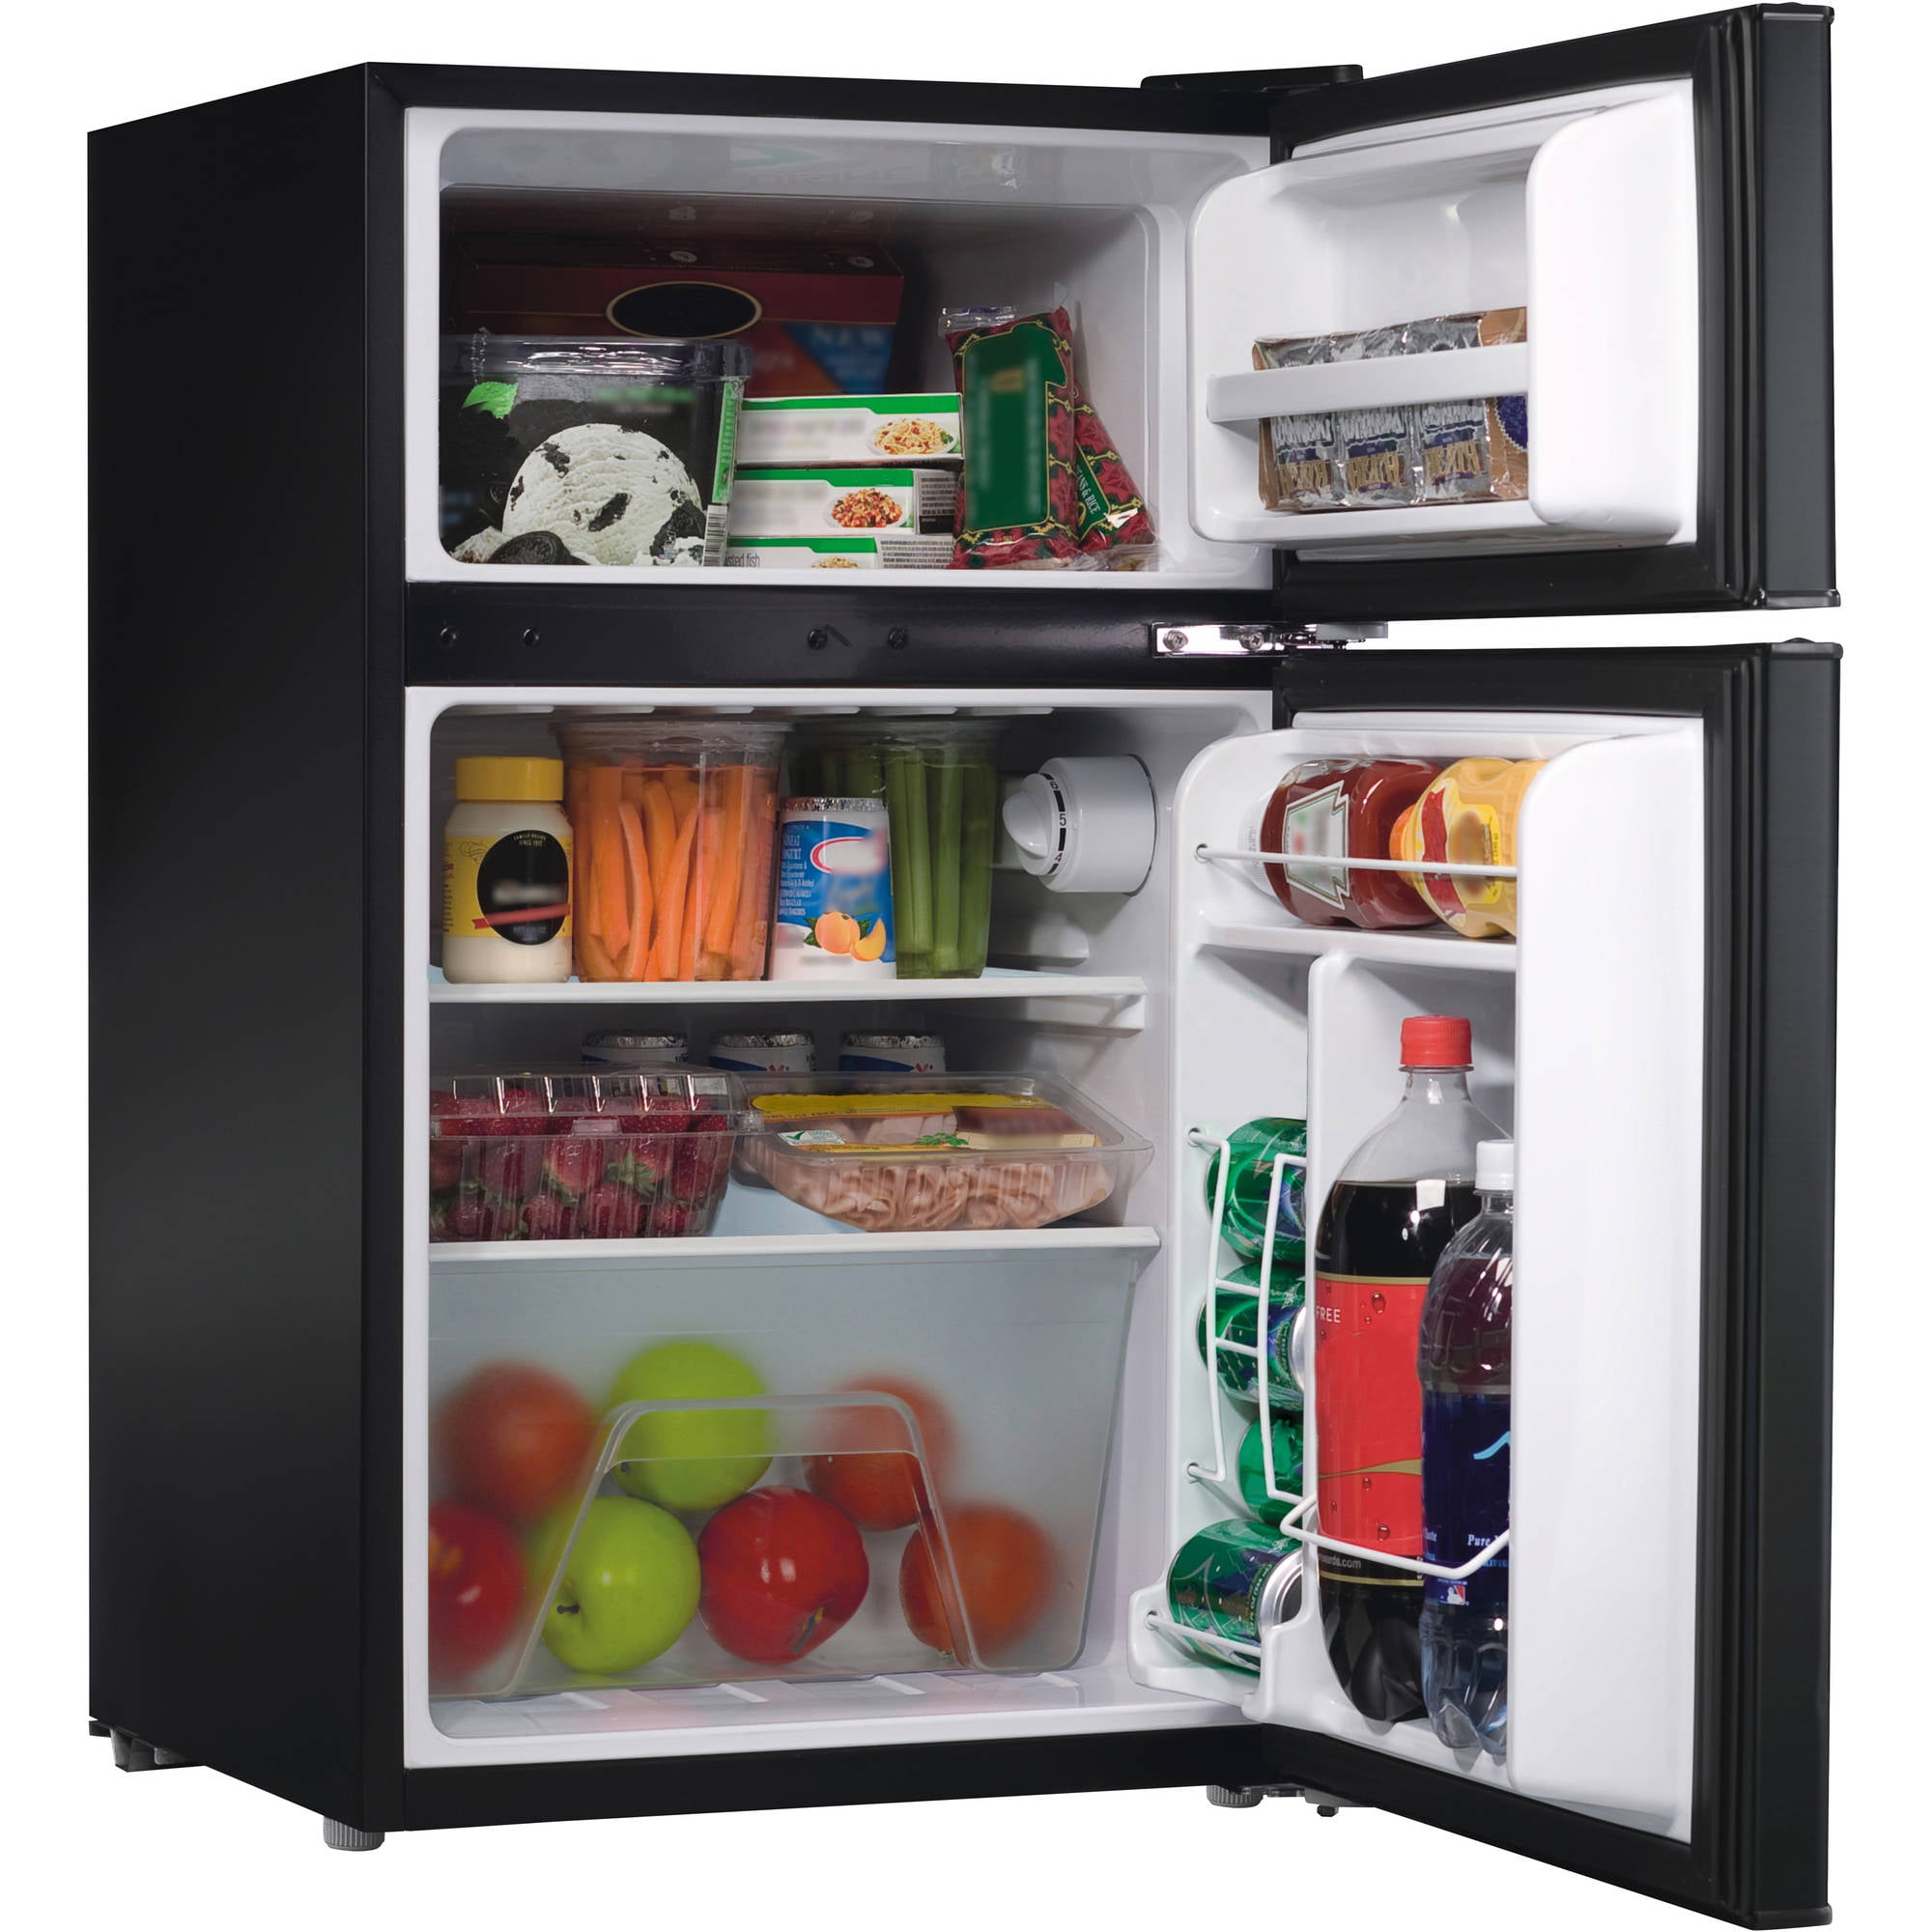 Discover the Top-Rated Budget-Friendly Refrigerators